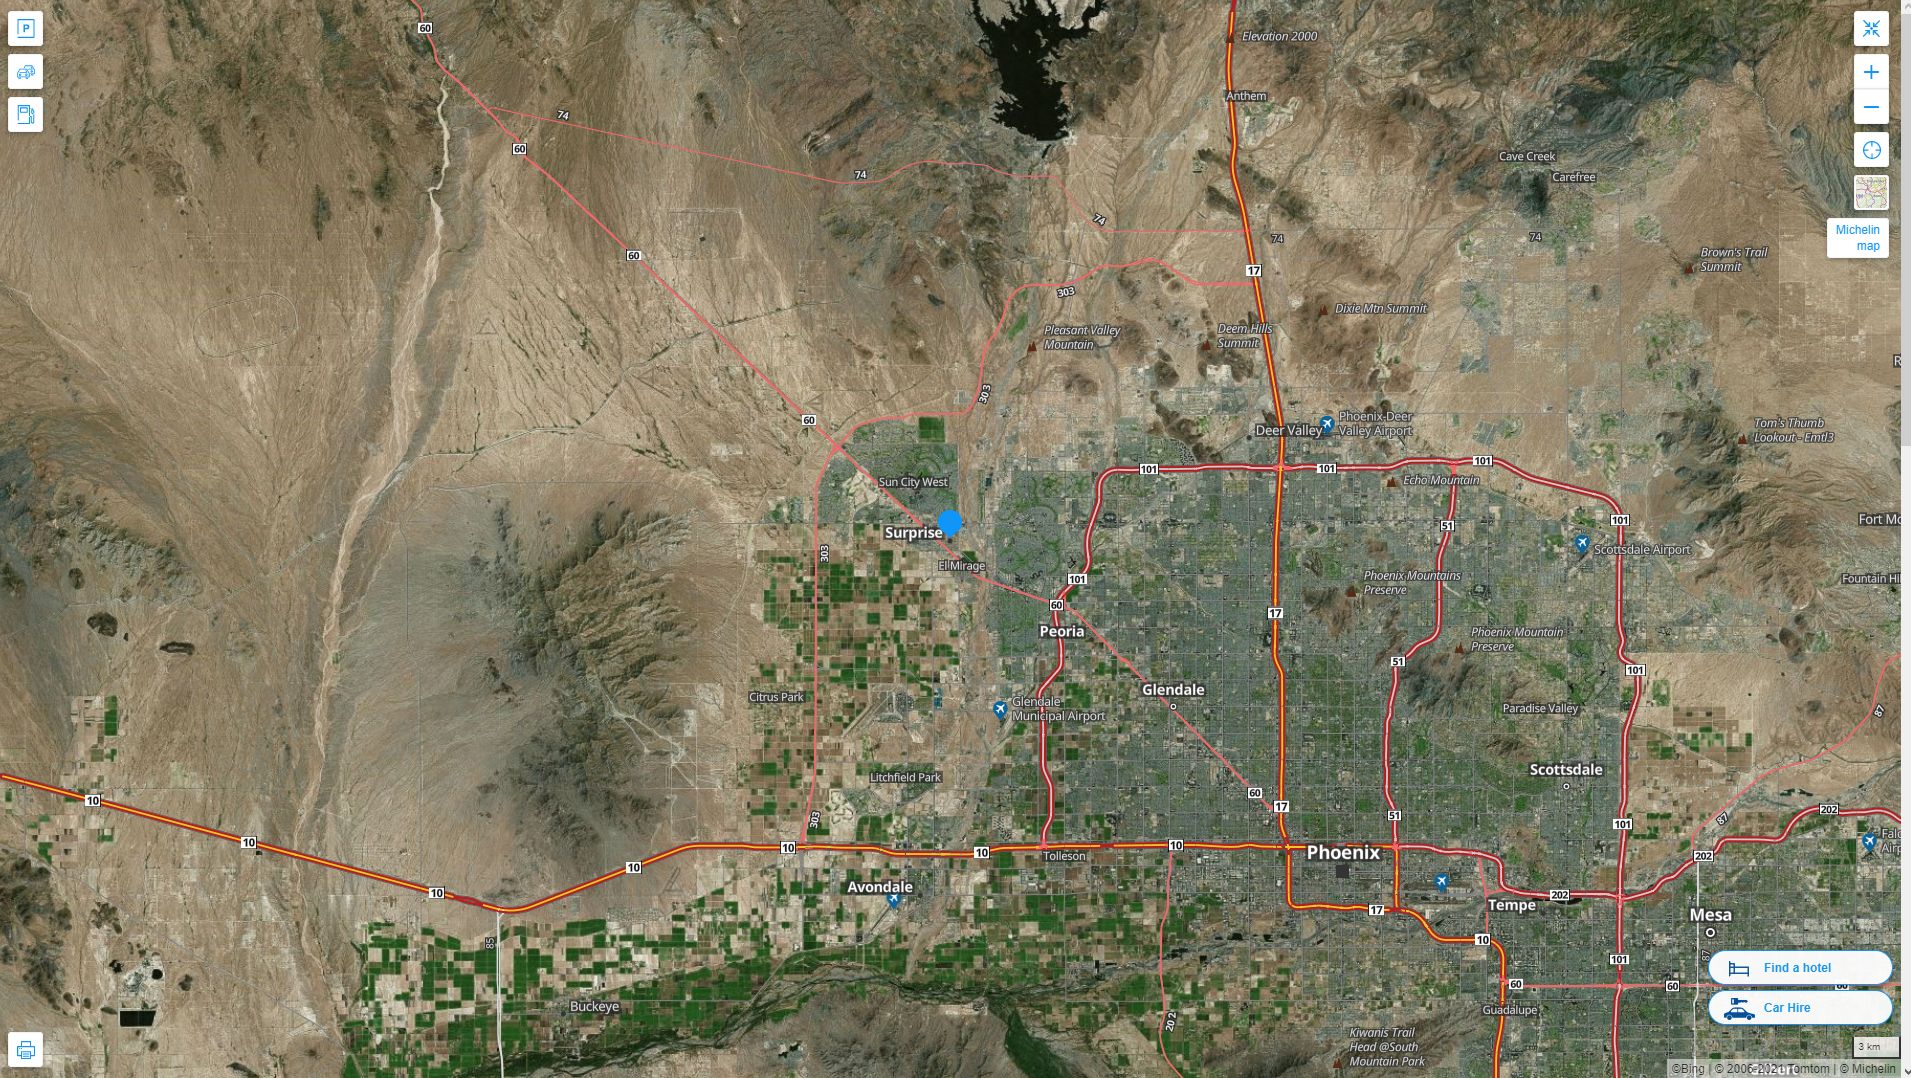 Surprise Arizona Highway and Road Map with Satellite View